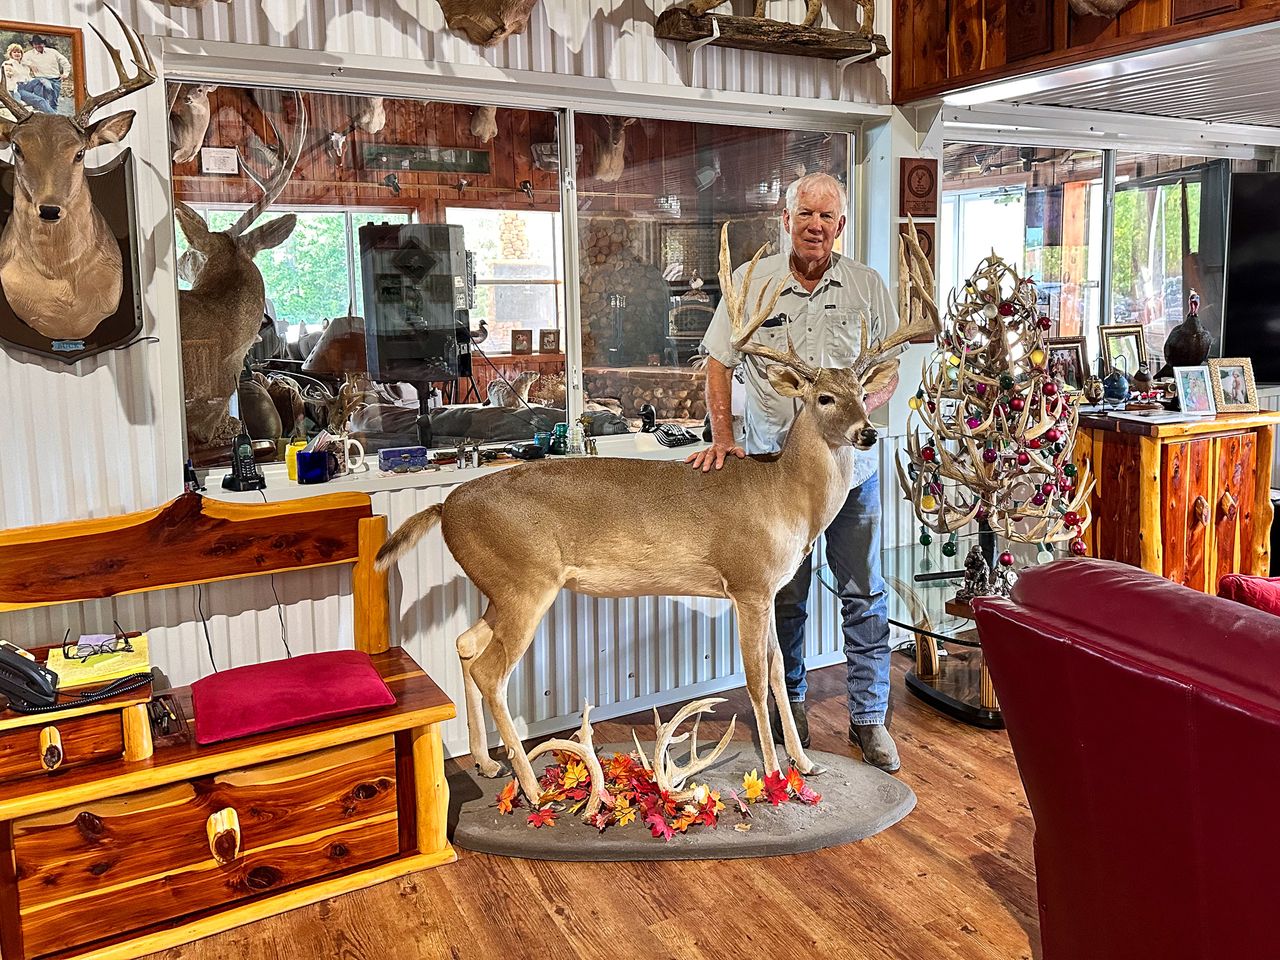 Robert Williams, shown here in a display room at his RW Trophy Ranch, says he offered a compromise to let wounded veterans come to his ranch and shoot the deer for free rather than have state agents mass kill the animals.